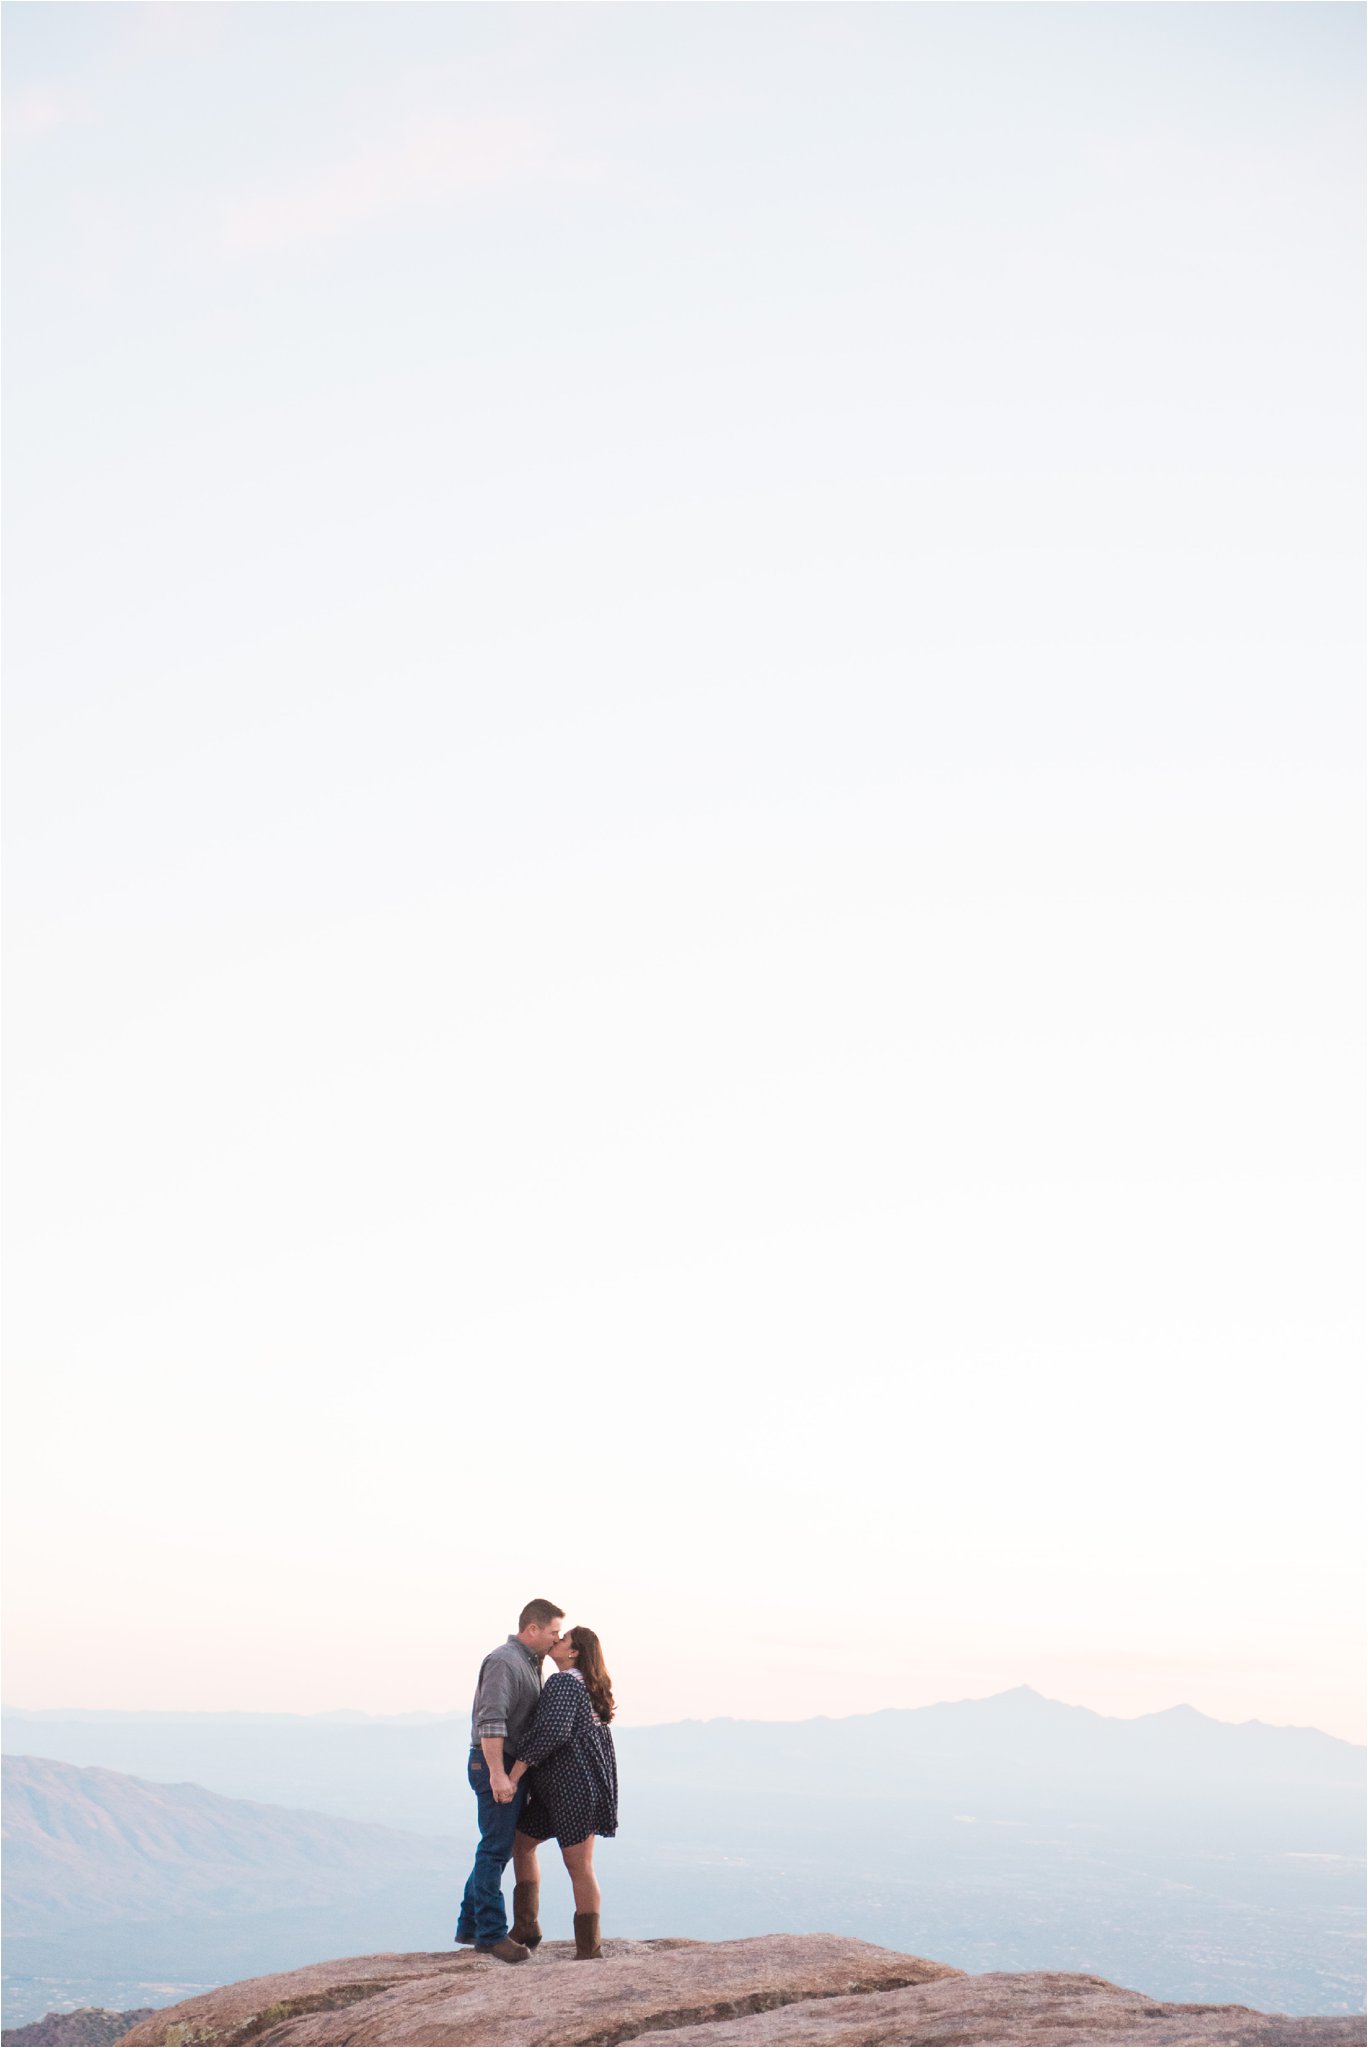 Mt Lemmon Family Session by Tucson photographer | West End Photography